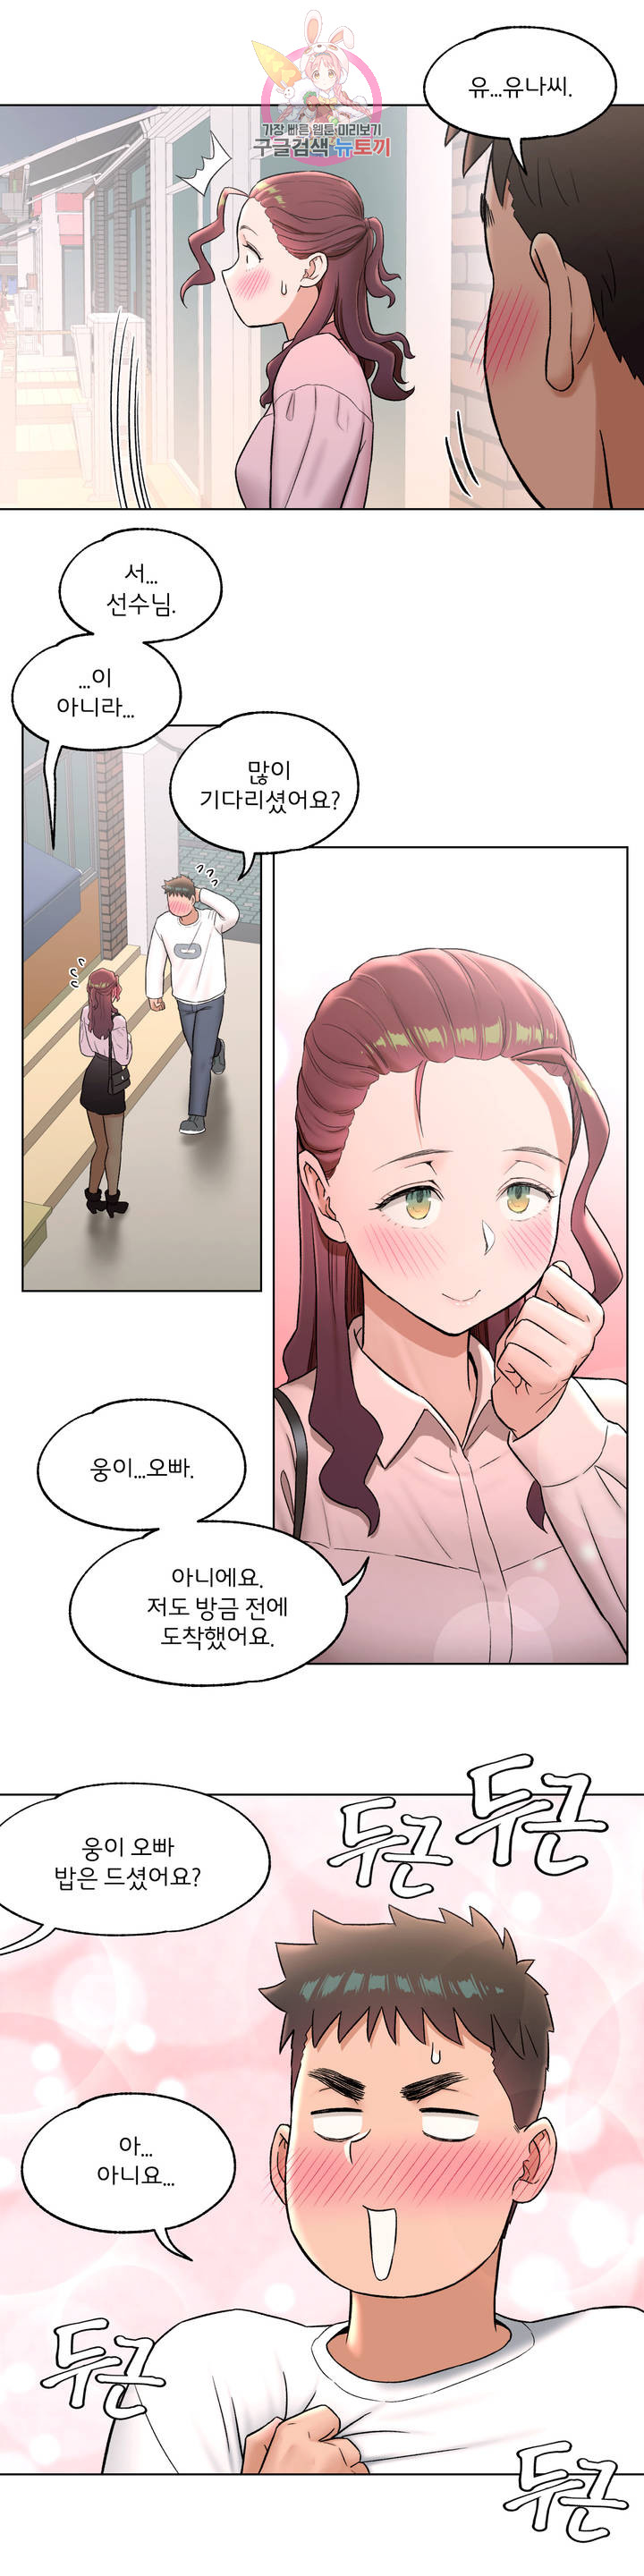 Sexercise Raw - Chapter 60 Page 3